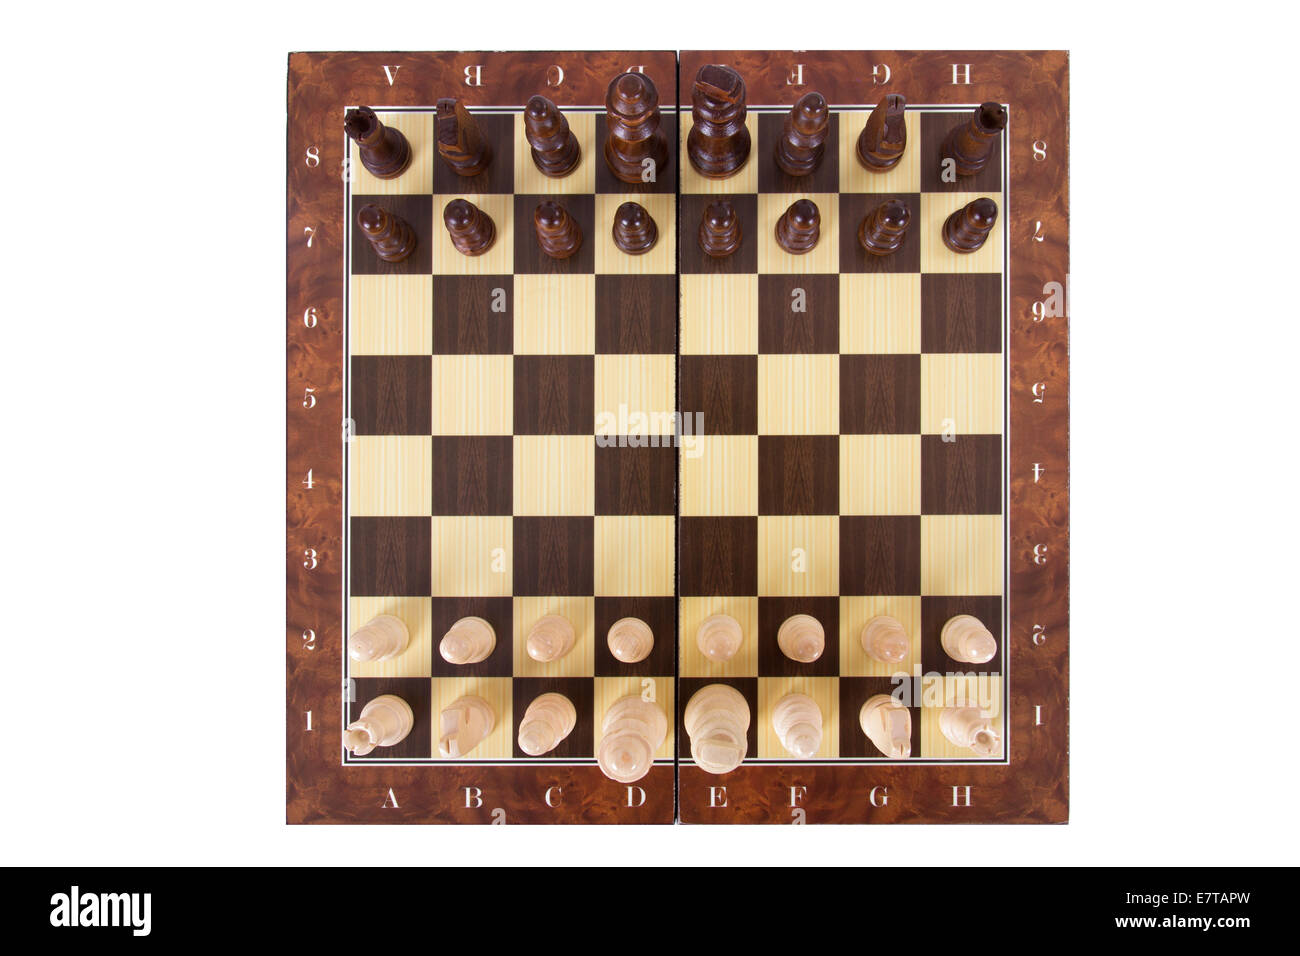 Image of The position of Chinese chess pieces at the beginning of